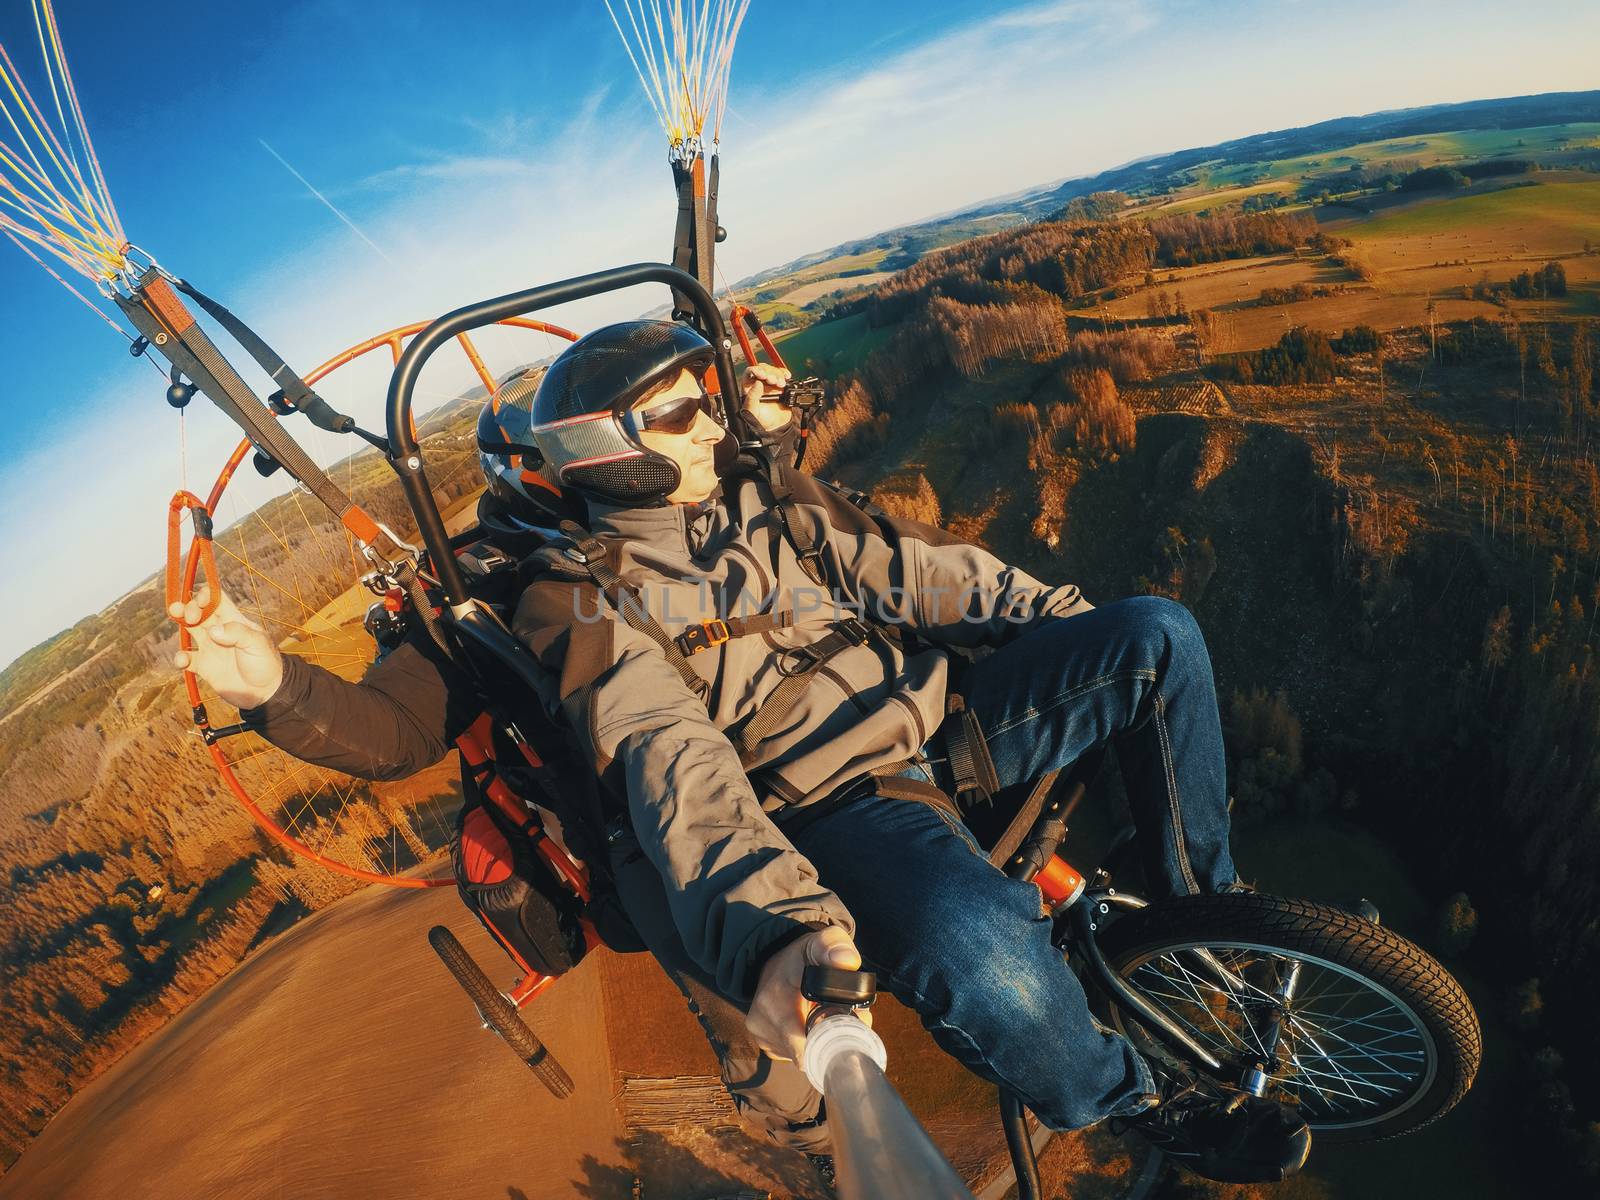 Powered paragliding tandem flight, man taking selfie with action camera